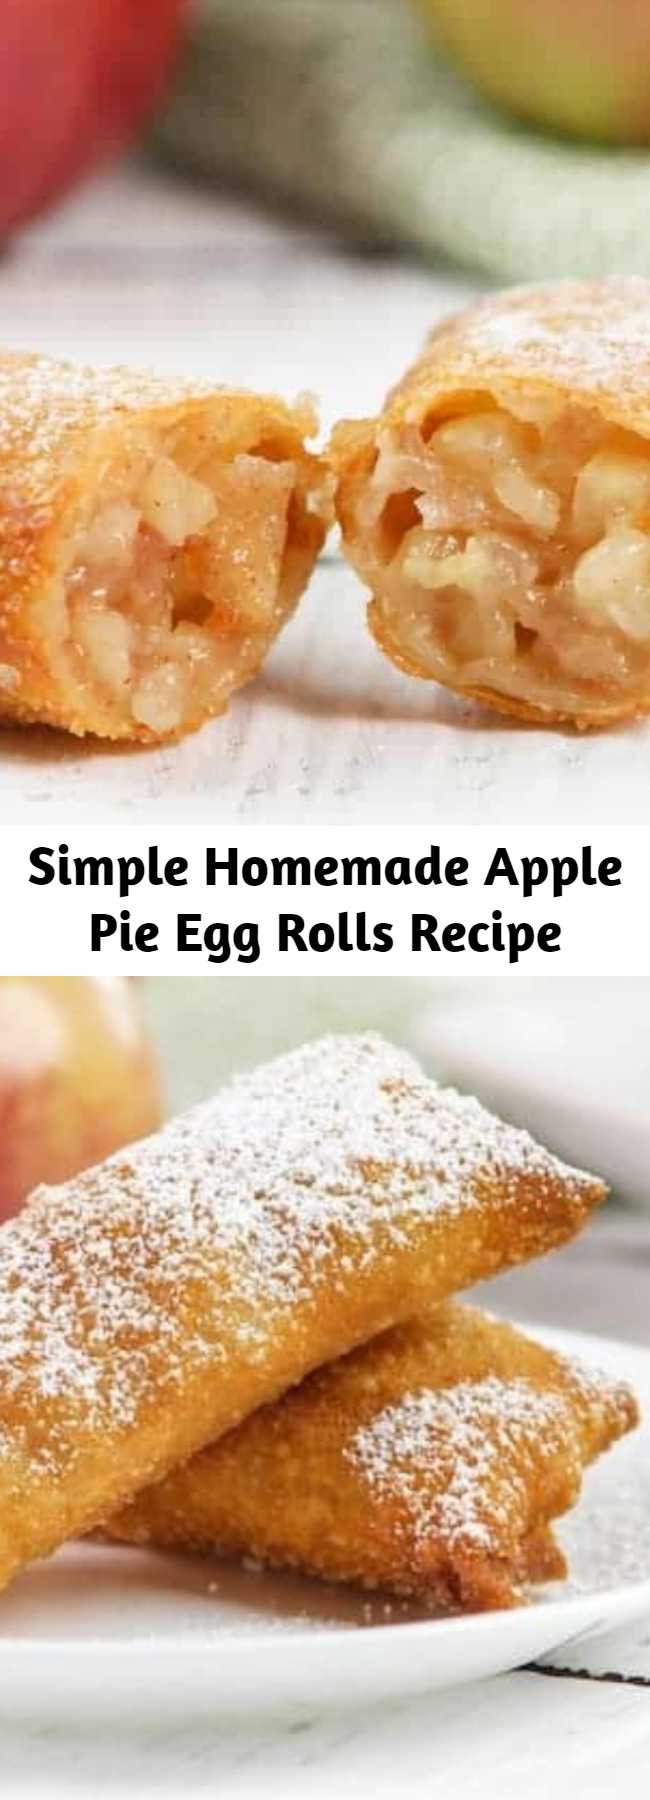 Simple Homemade Apple Pie Egg Rolls Recipe - These yummy little bundles are filled with a simple homemade cinnamon apple filling, deep fried golden brown and kissed with cinnamon.